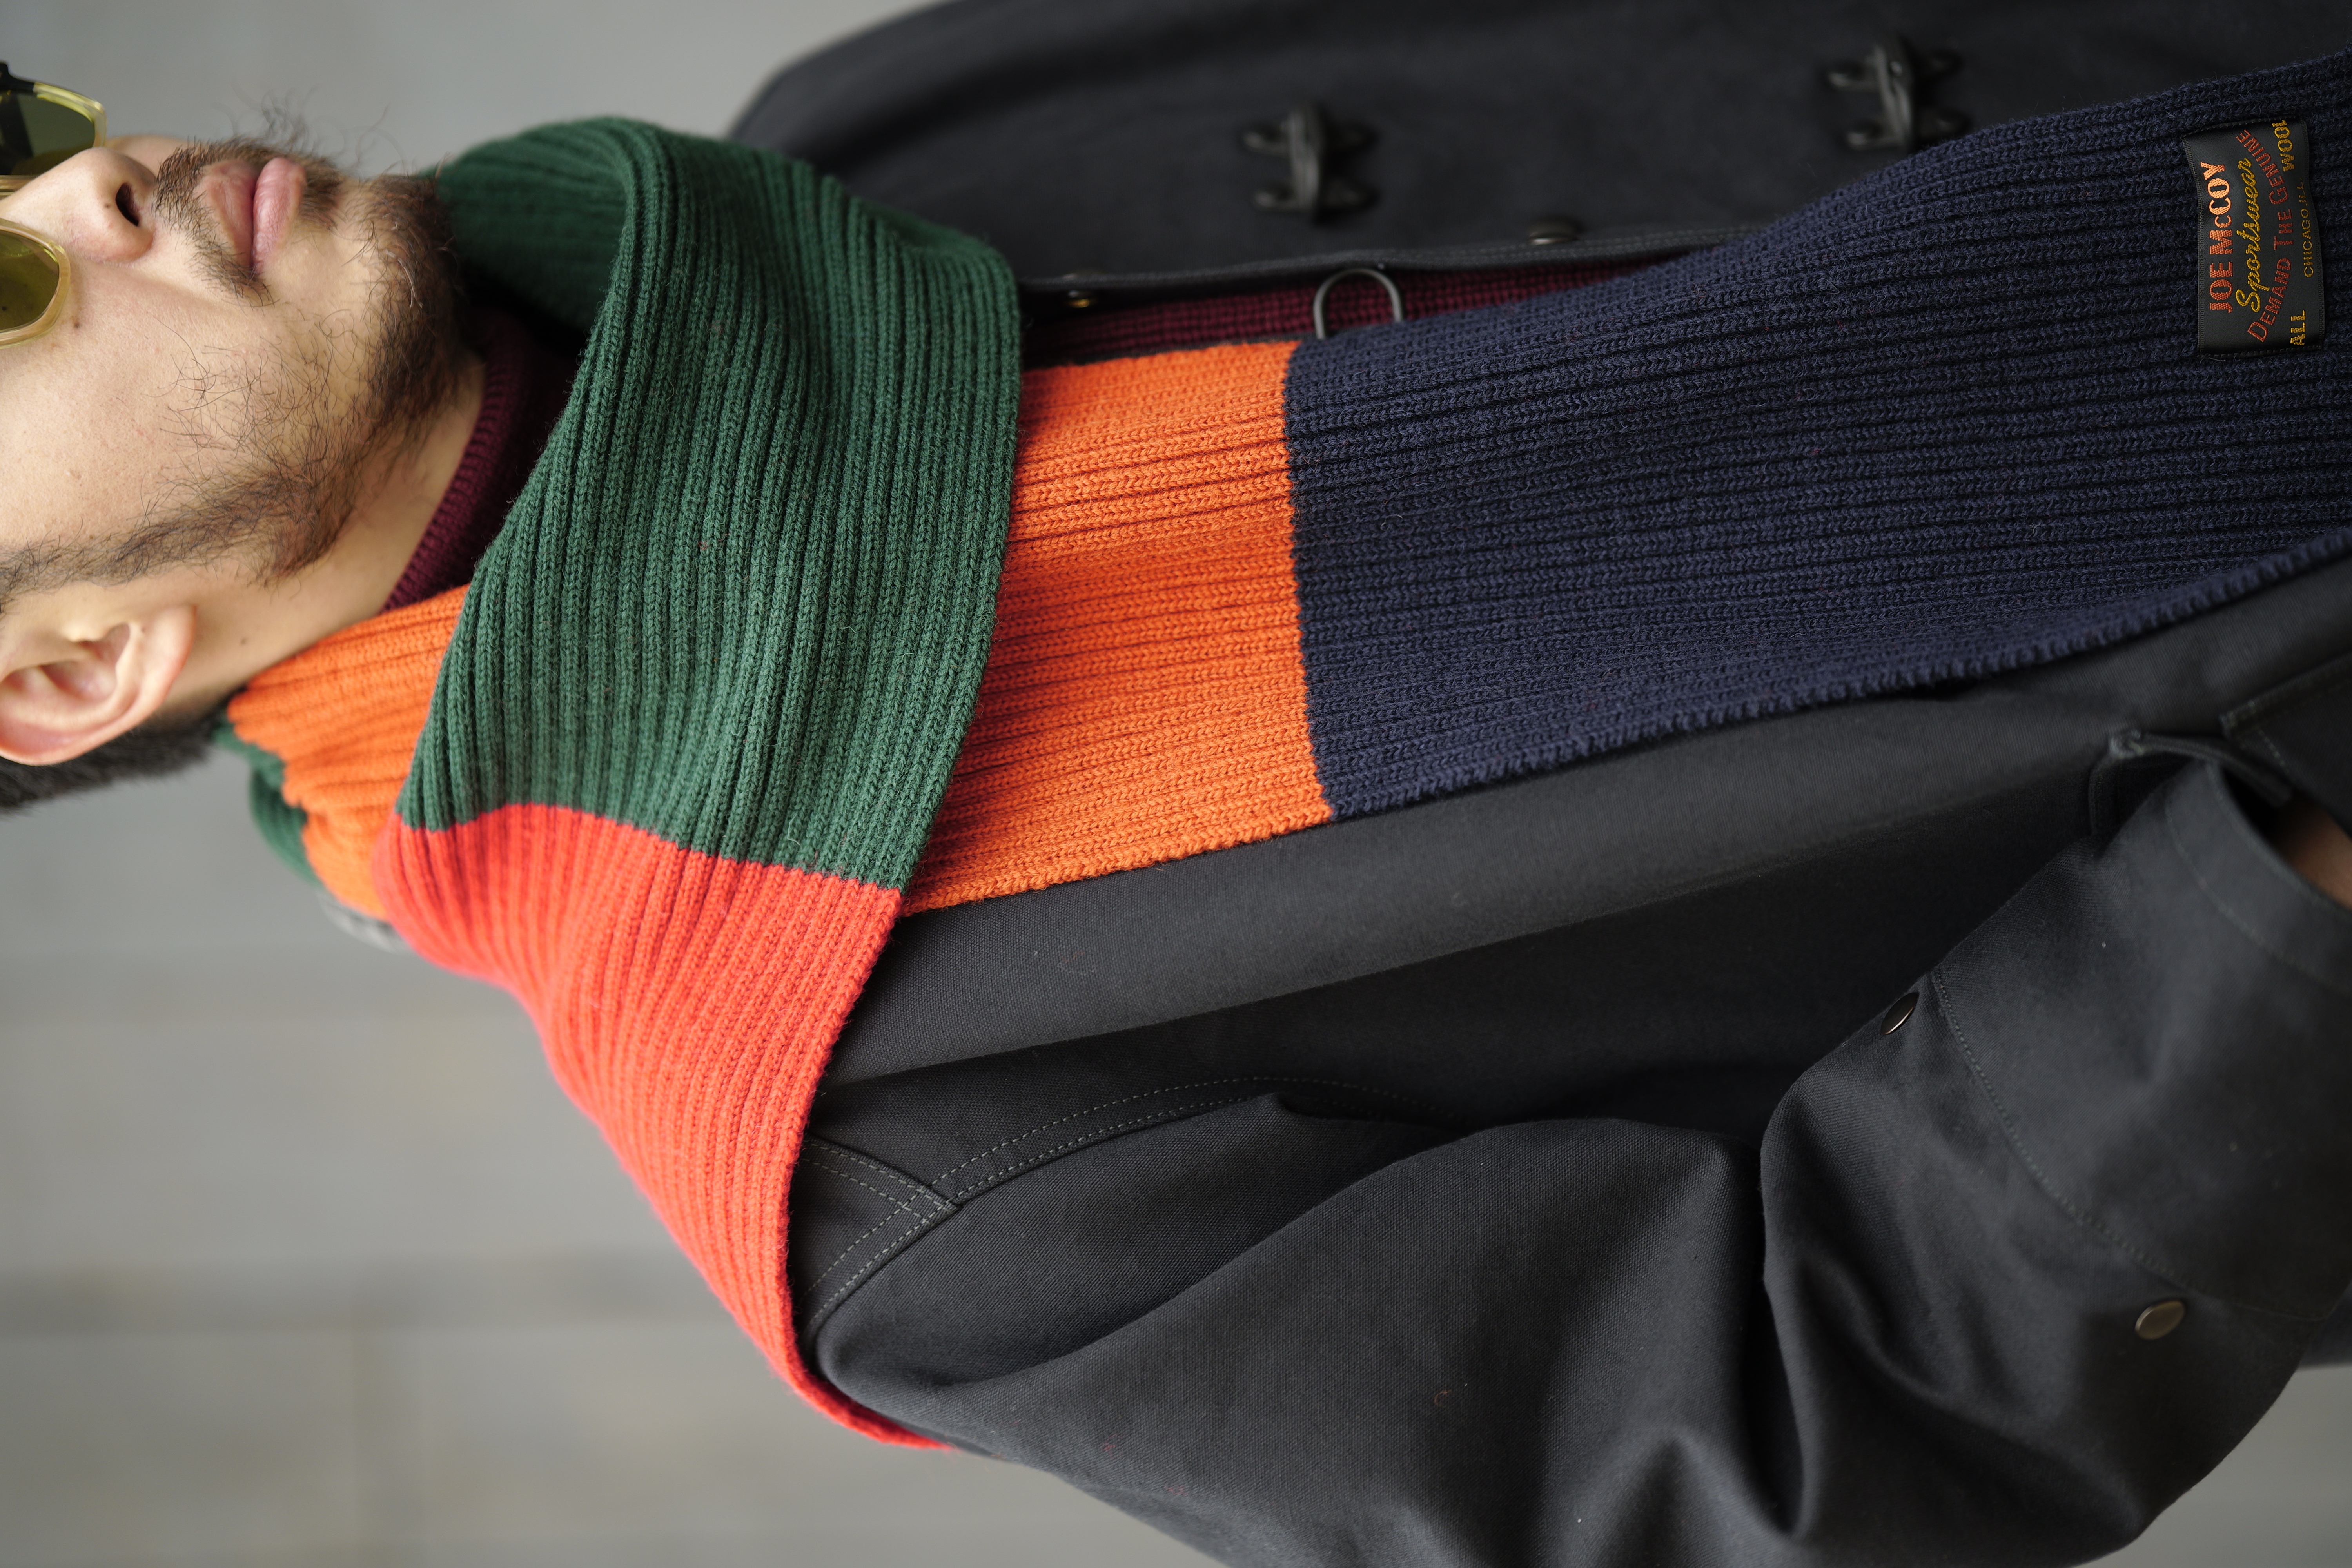 MULTI-COLOR CAMPUS SCARF – The Real McCoy's